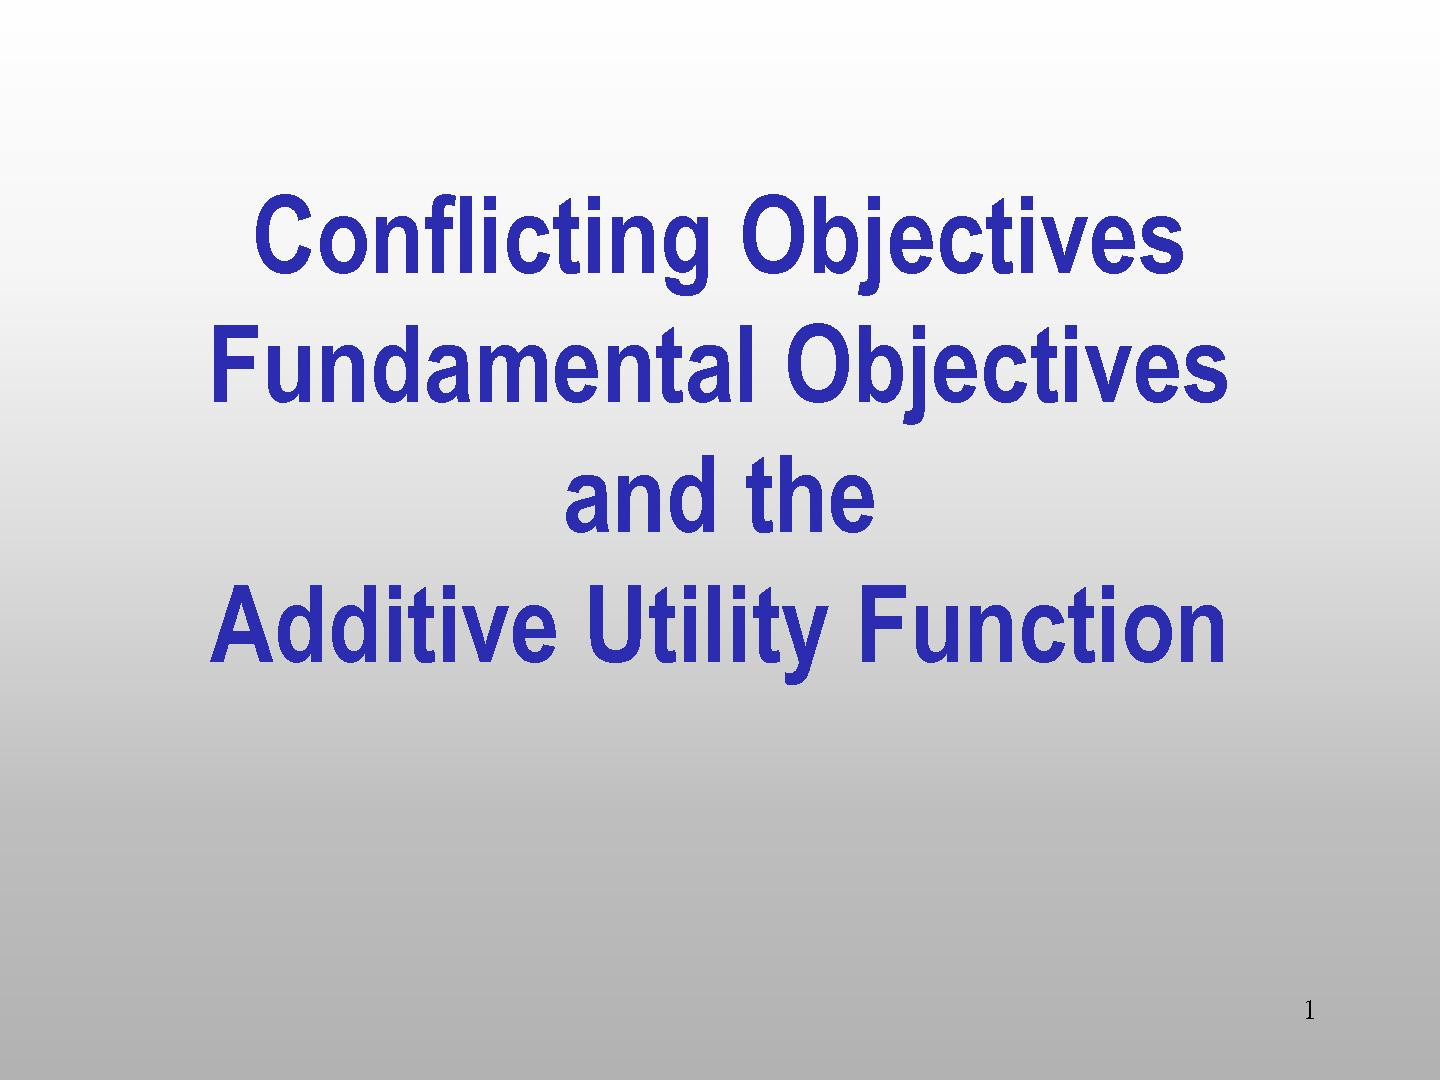 Conflicting Objectives - Fundamental Objectives and the Additive Utility Function